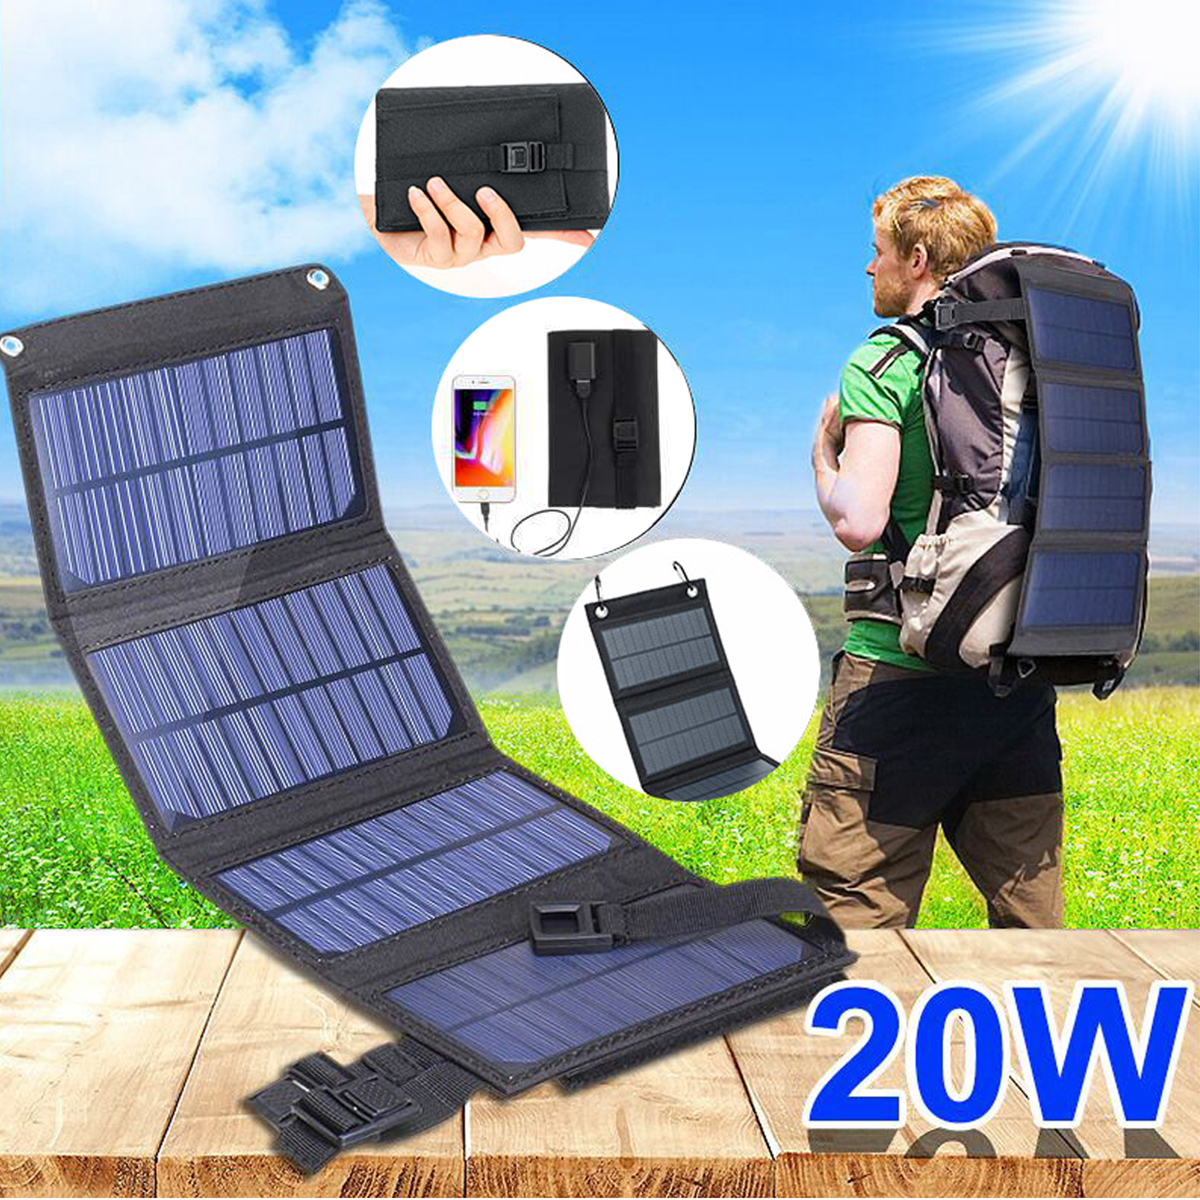 20W-USB-Solar-Panel-Folding-Power-Bank-Outdoor-Camping-Hiking-Phone-Charger-1925216-2